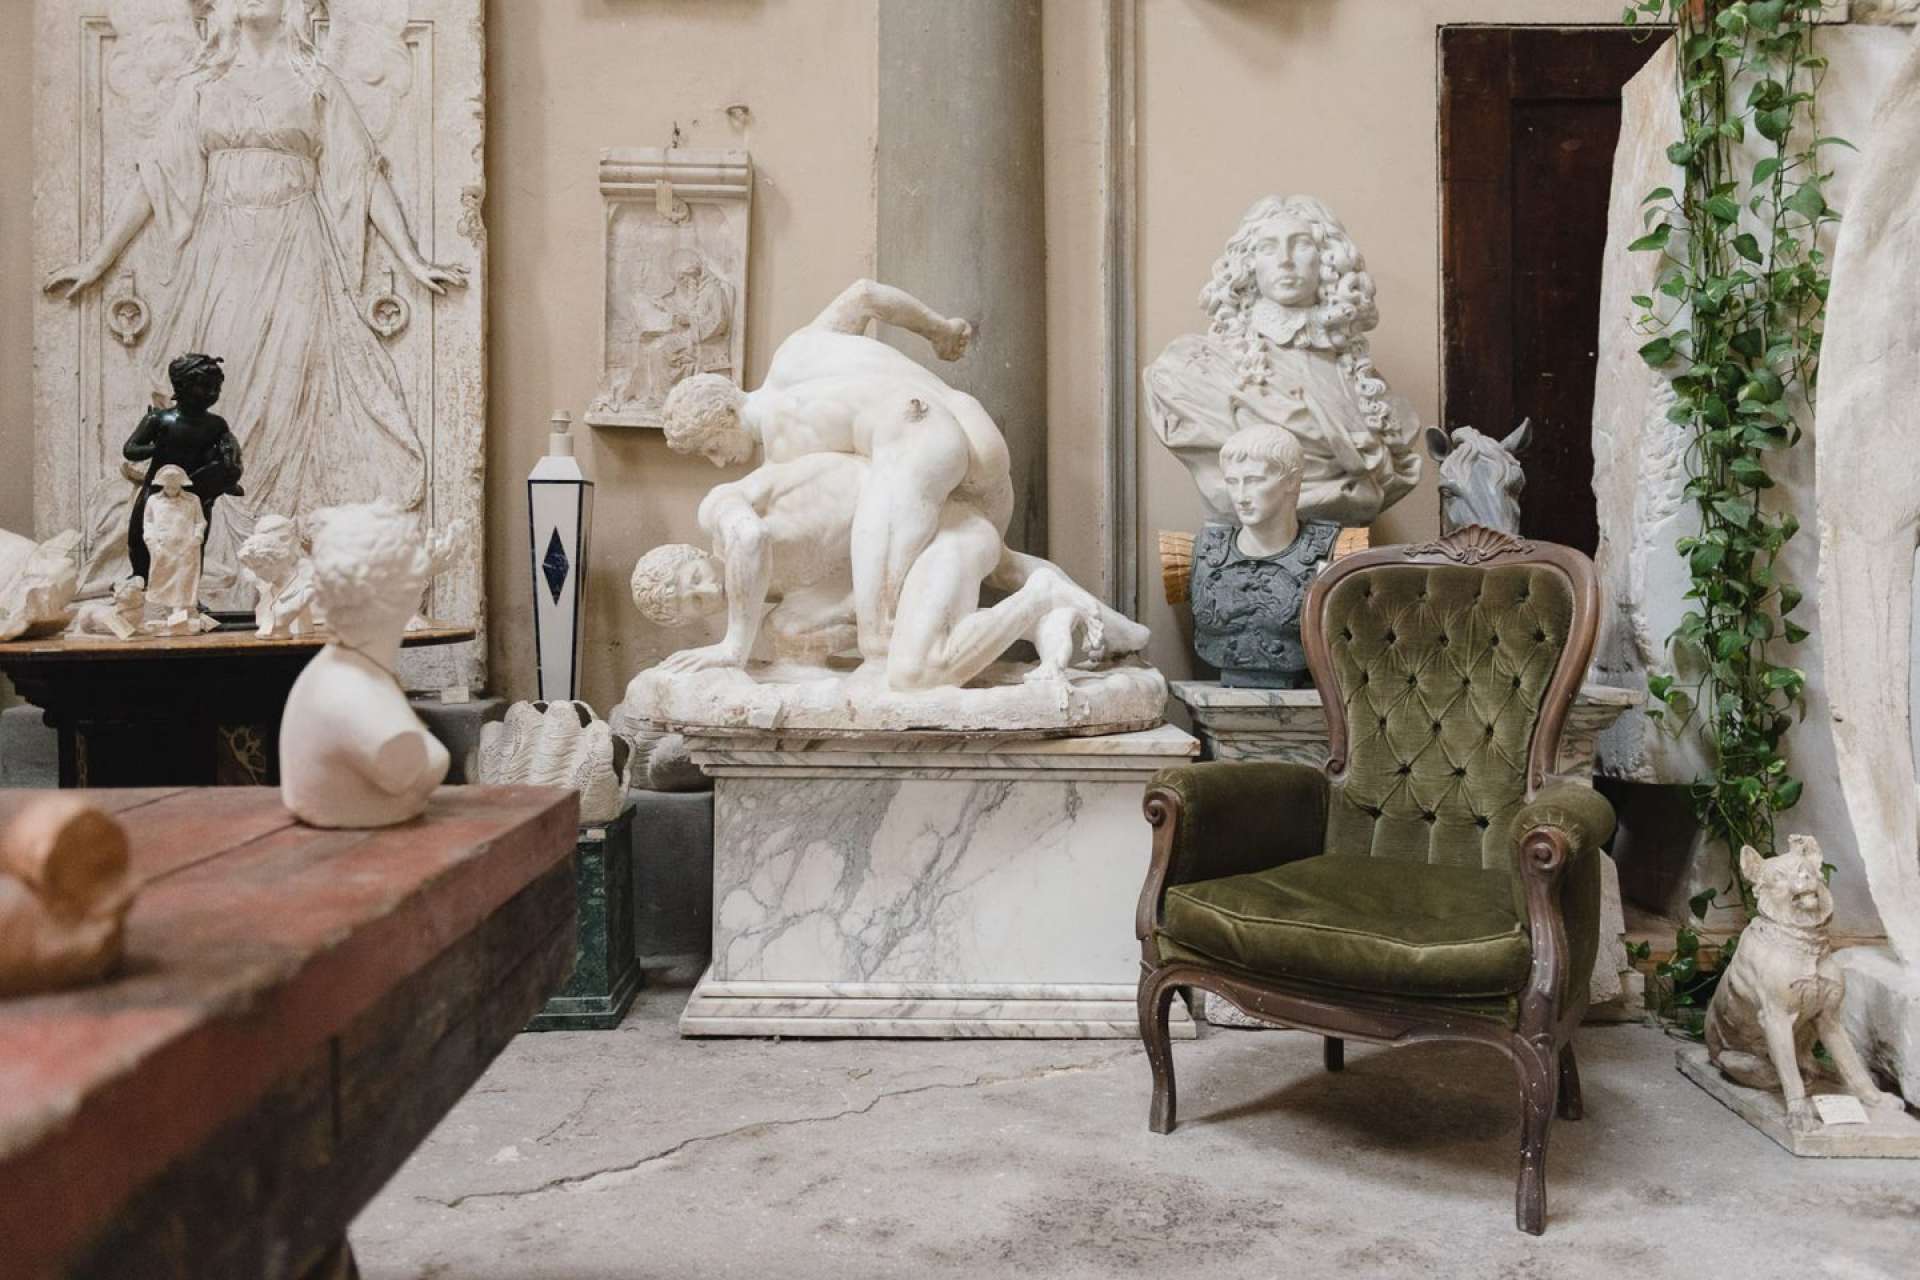 Sculpture Moulding Workshop in a Historic Atelier in Florence